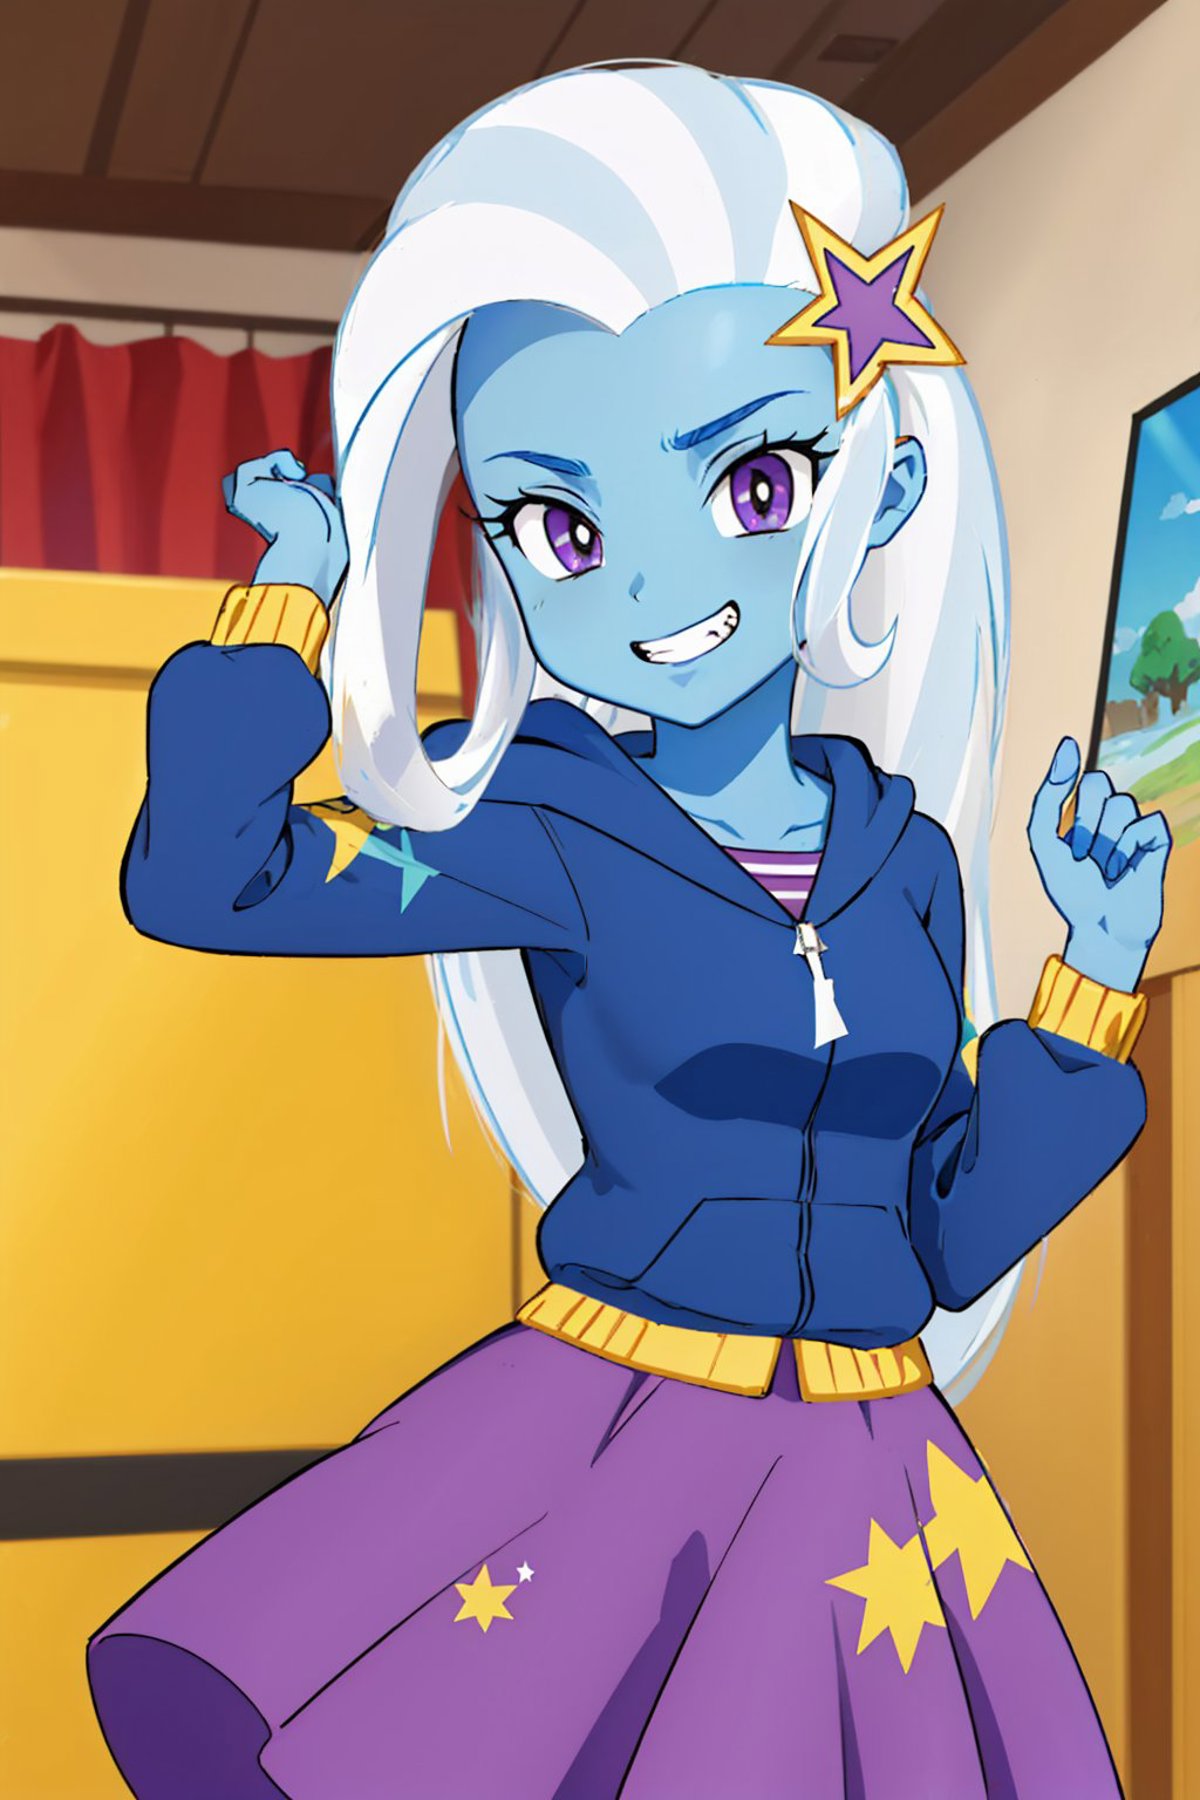 Trixie Lulamoon | My Little Pony / Equestria Girls image by justTNP